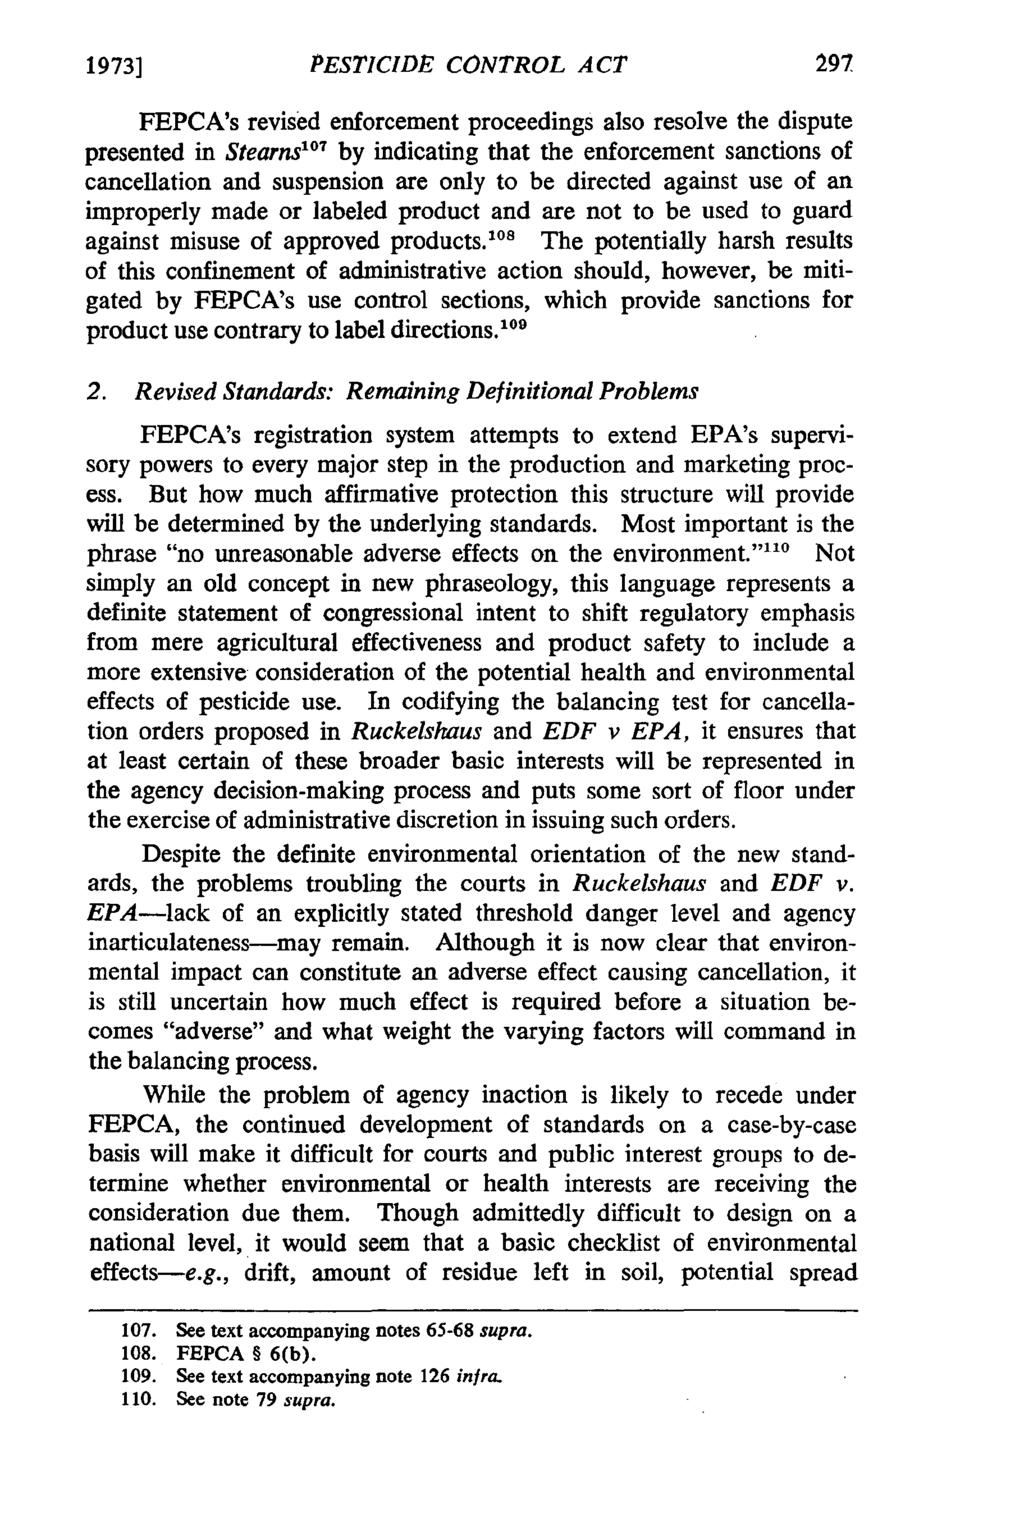 1973] PESTICIDE CONTROL ACT FEPCA's revised enforcement proceedings also resolve the dispute presented in Stearns 10 7 by indicating that the enforcement sanctions of cancellation and suspension are